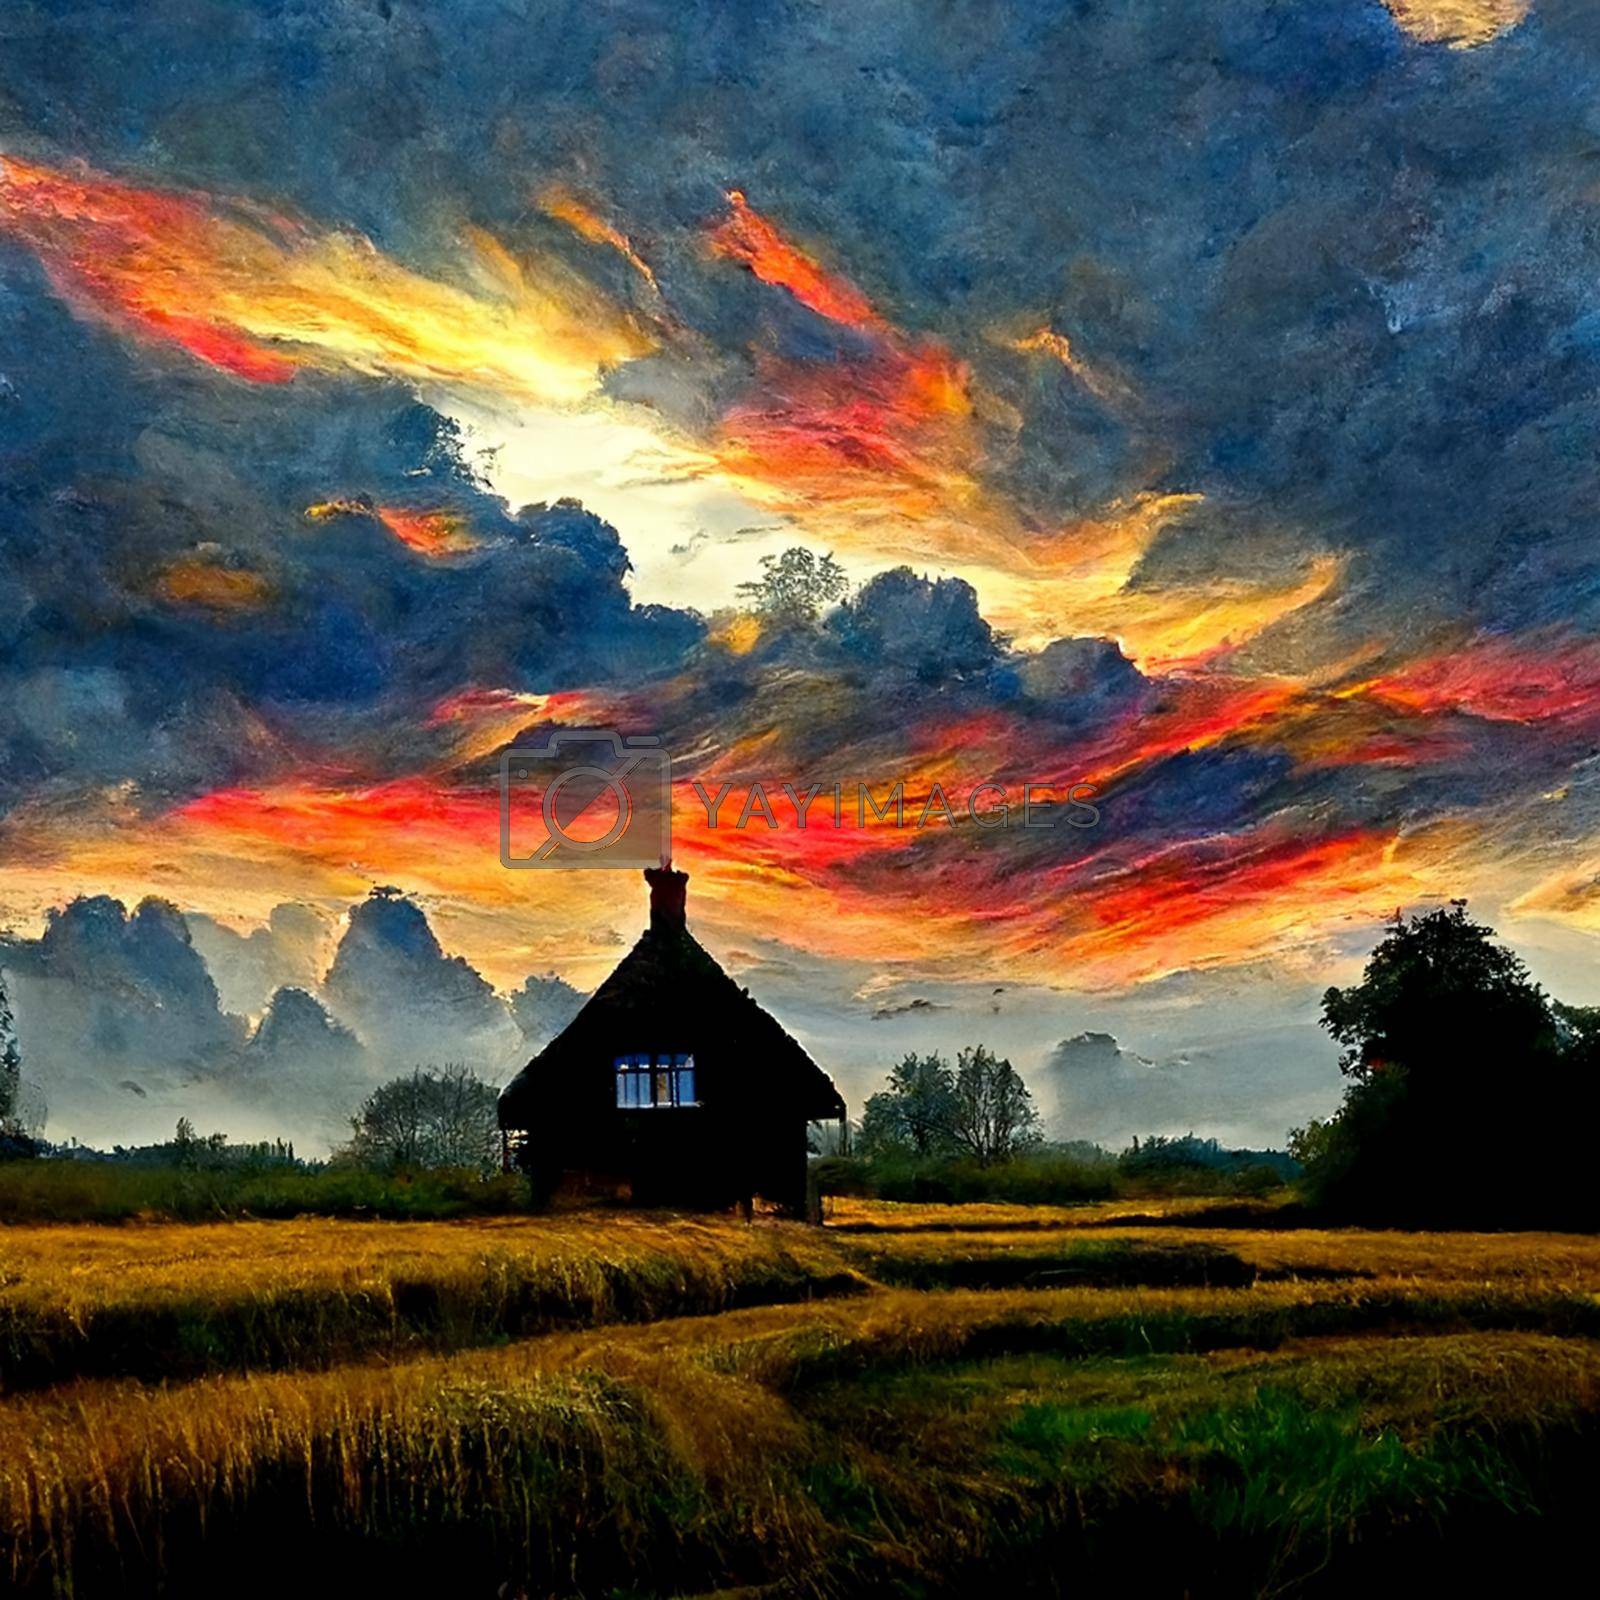 Sunset countryside landscape with farm, agriculture field and house. Digital generated illustration of rural scene, farmland with granary, meadow, fence in orange sun clouds.